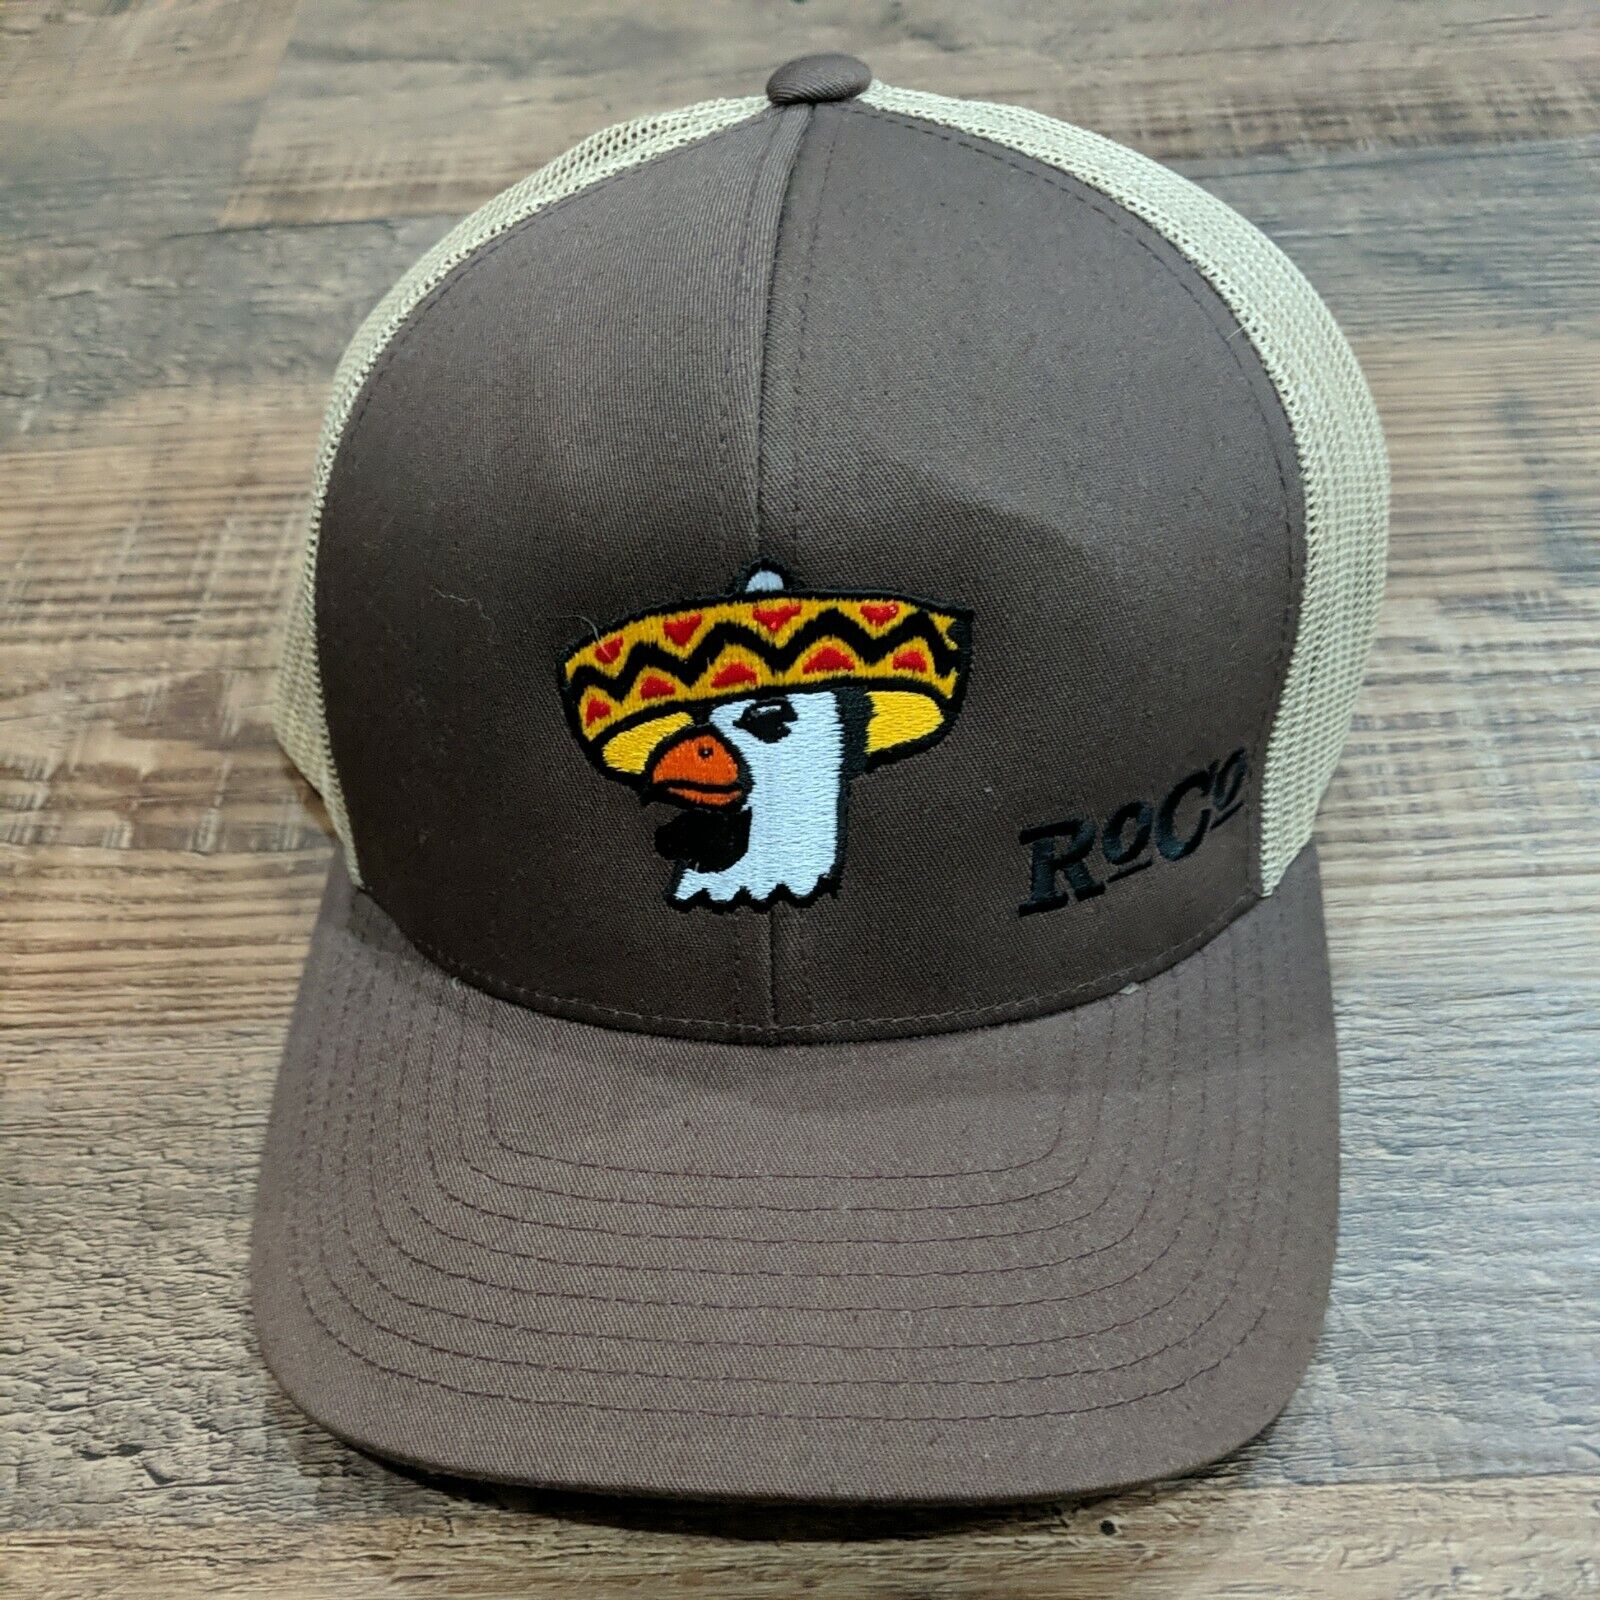 Mexican Chicken RoCo Get Roasted Coffee Trucker Hat Baseball Cap NWOT Rooster